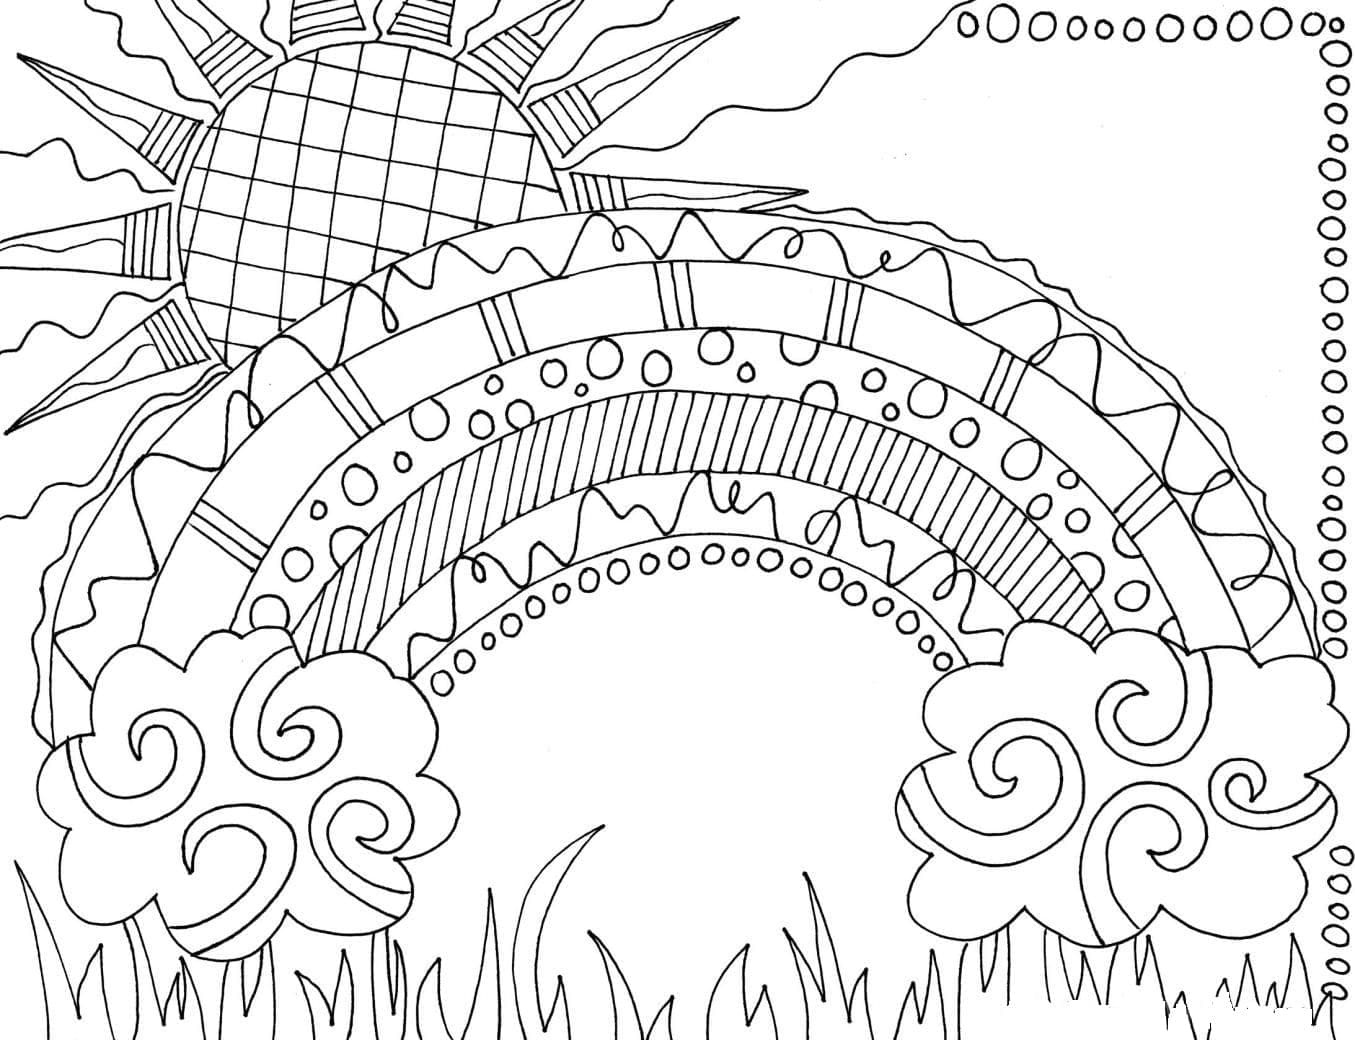 Hard and Difficult to Color Adult Rainbow Coloring Pages for Stress